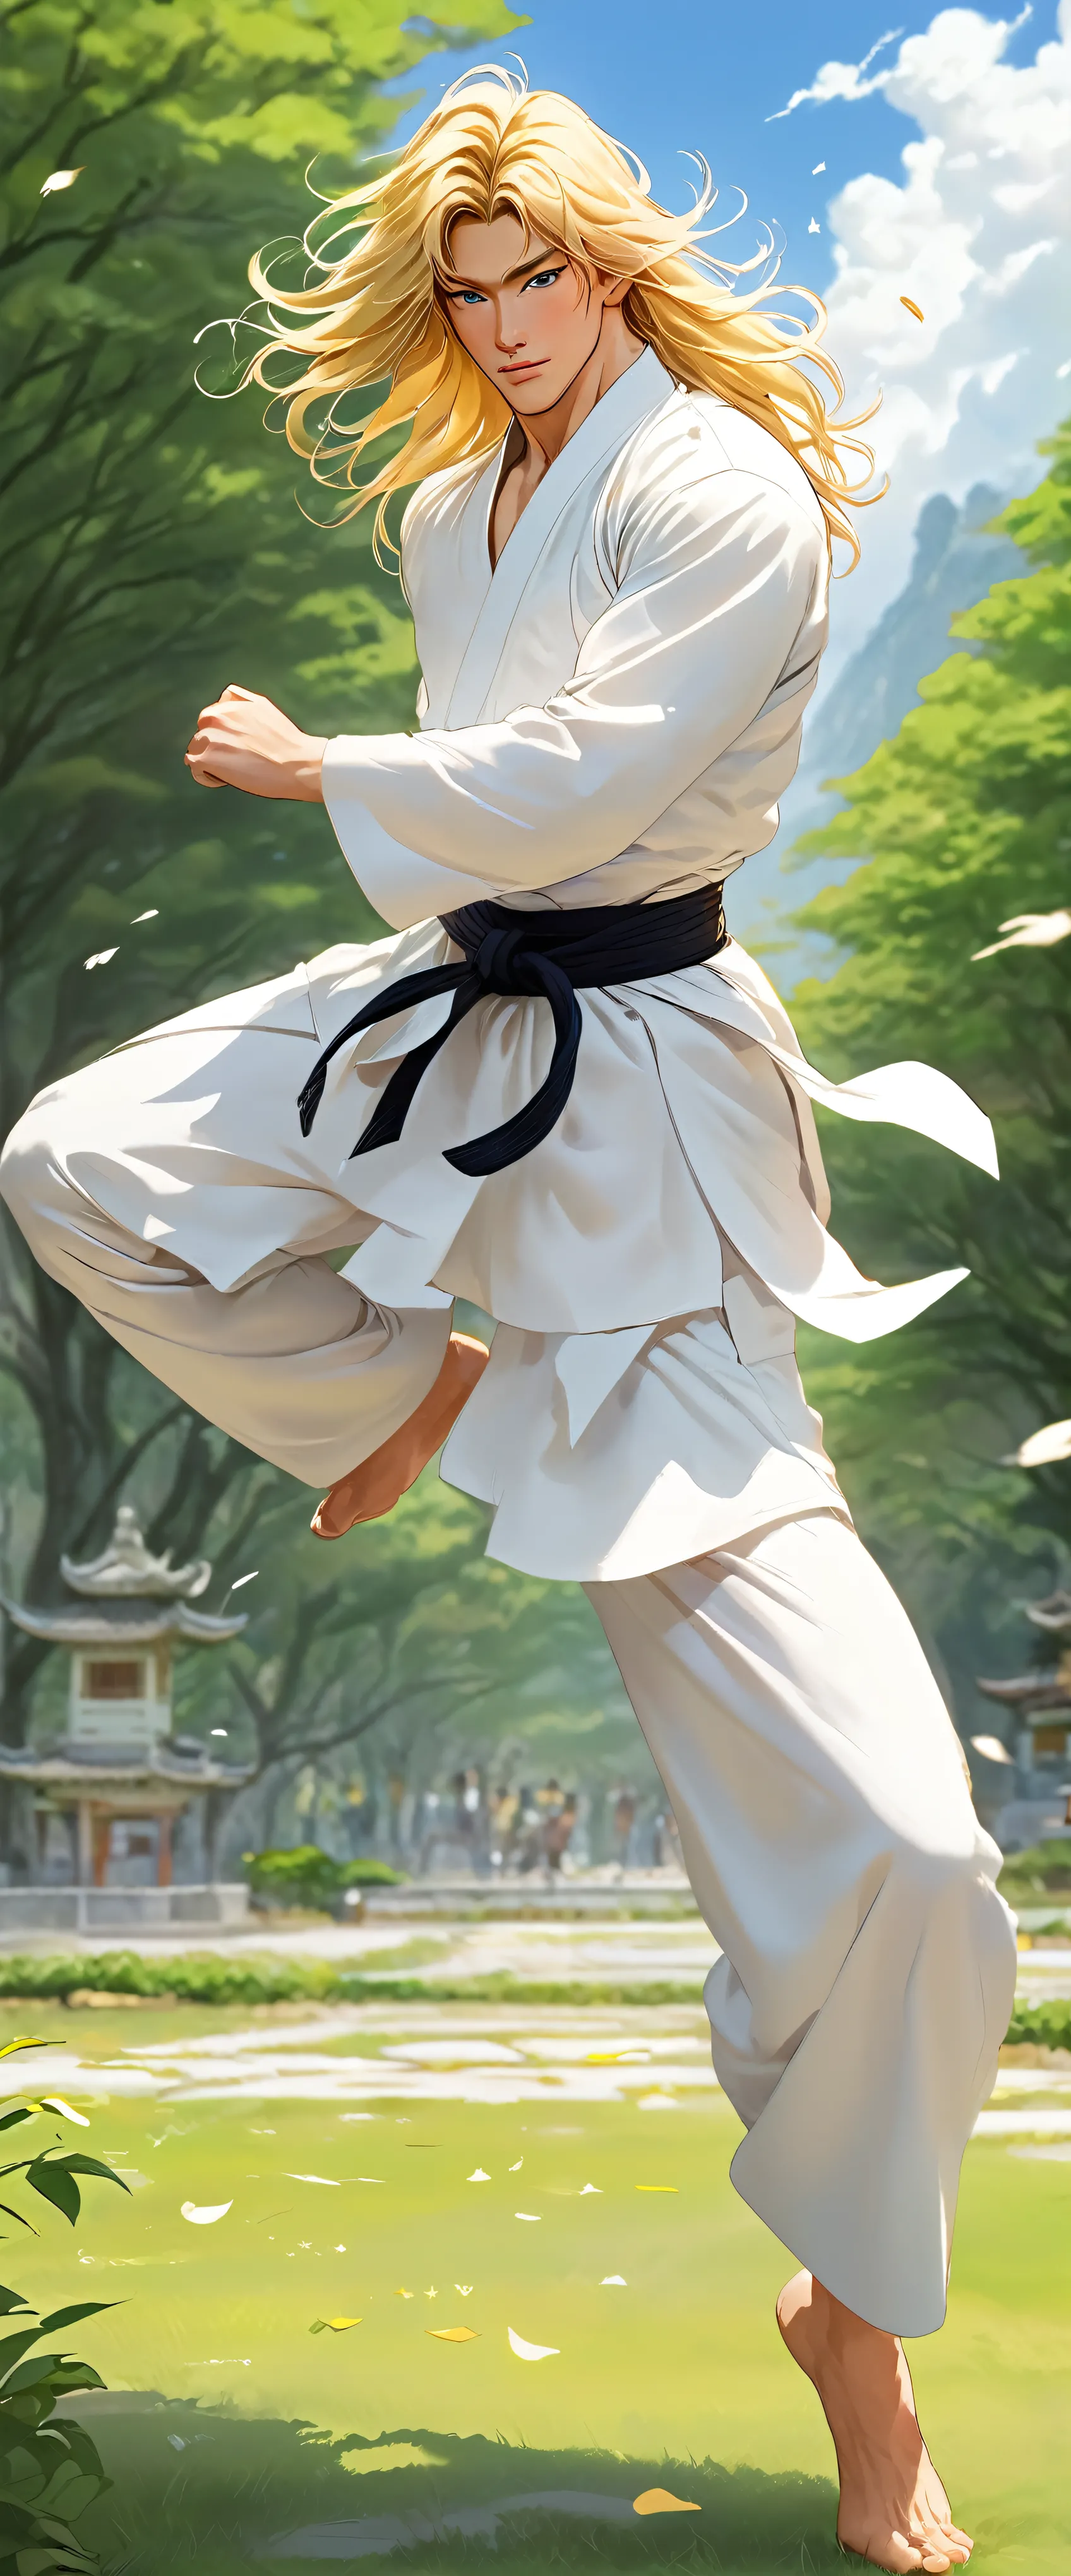 Character anime man standing in a park in nature: At the heart of a calm, white-based environment、A lively young cartoon man sta...